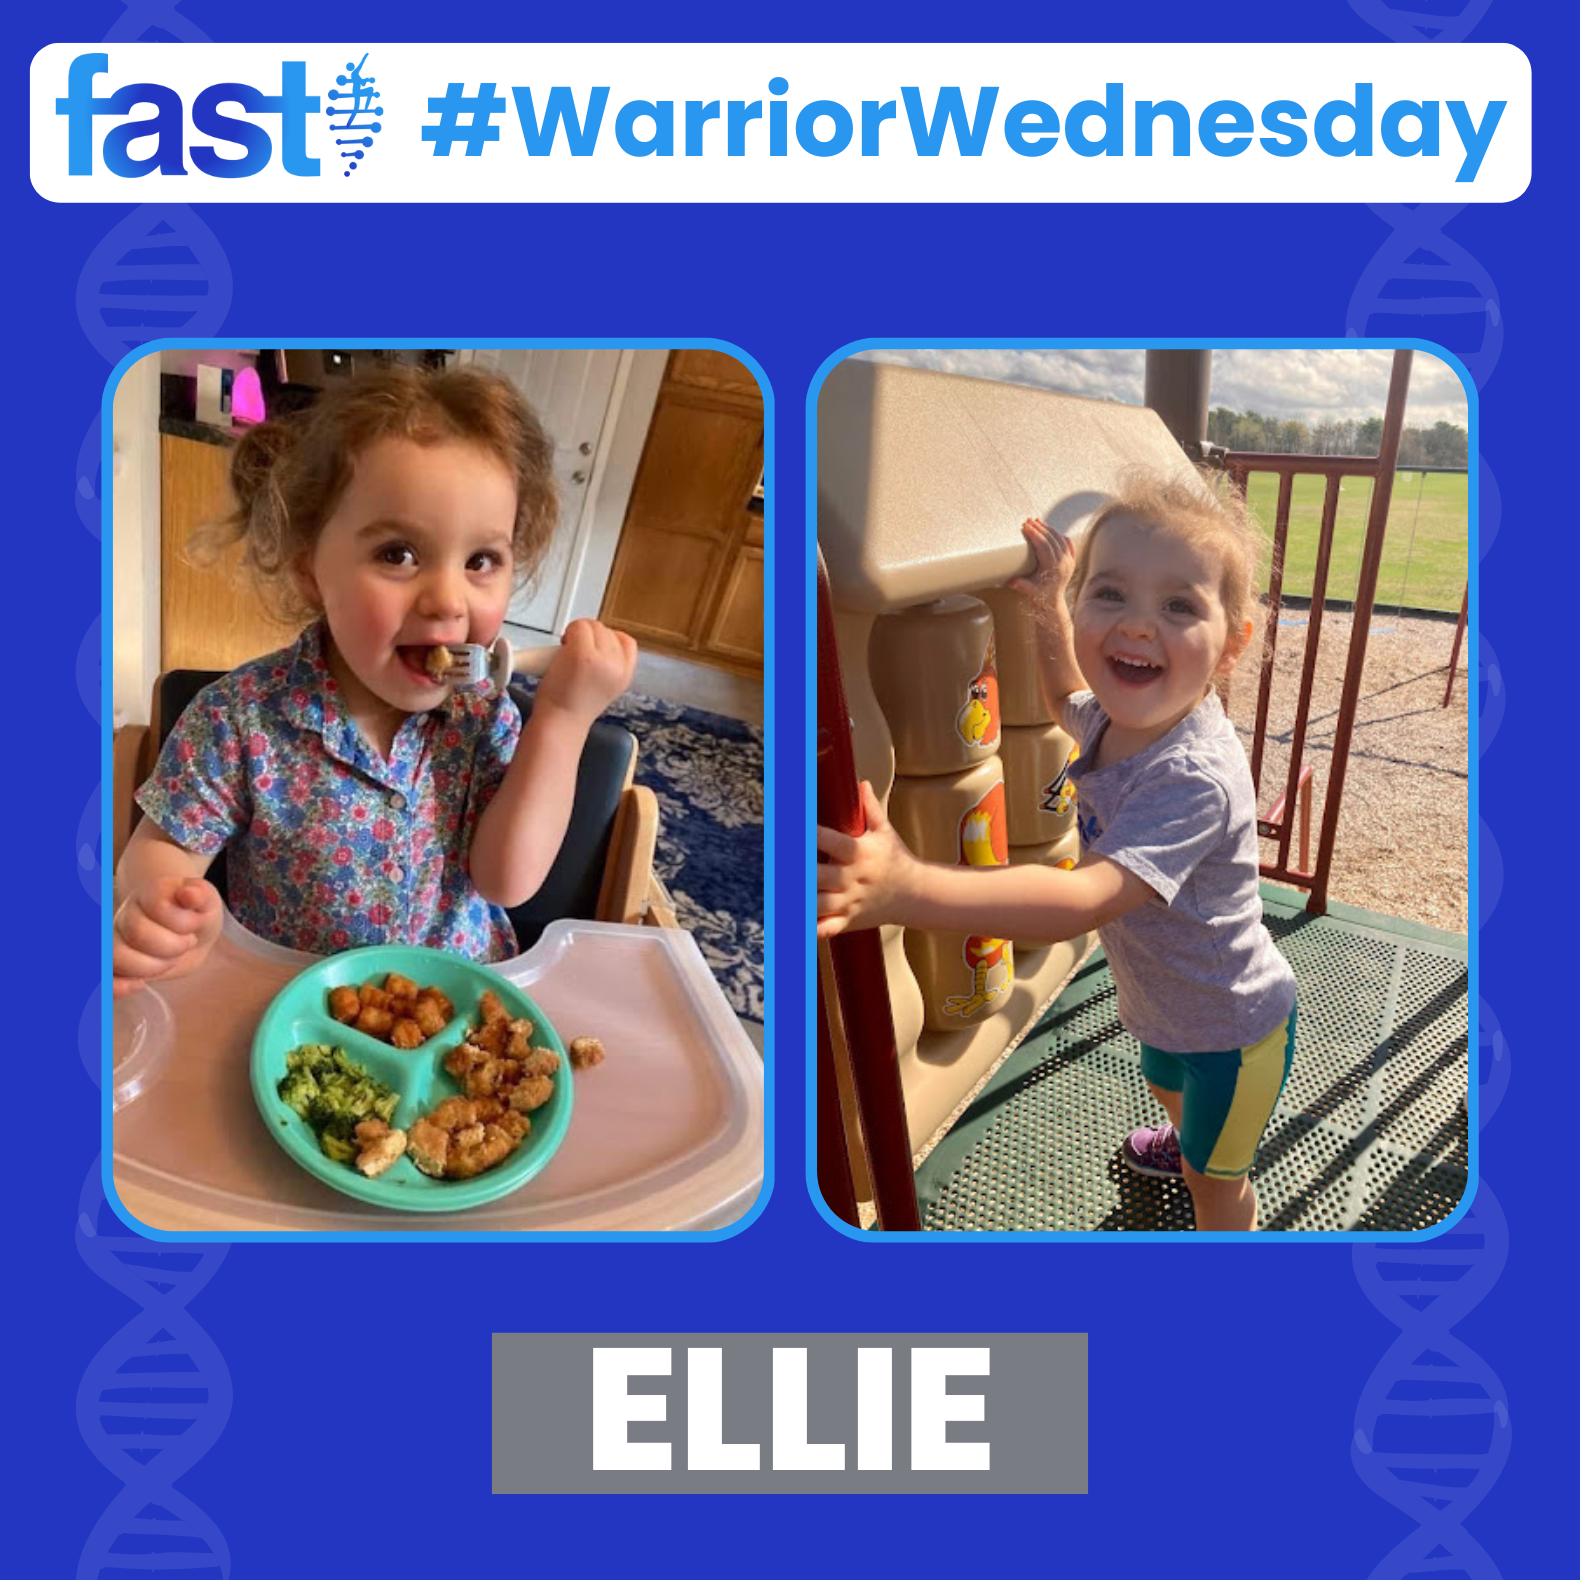 FAST Warrior Wednesday - Ellie, with photos of Ellie eating food with a fork and standing and smiling at a playground